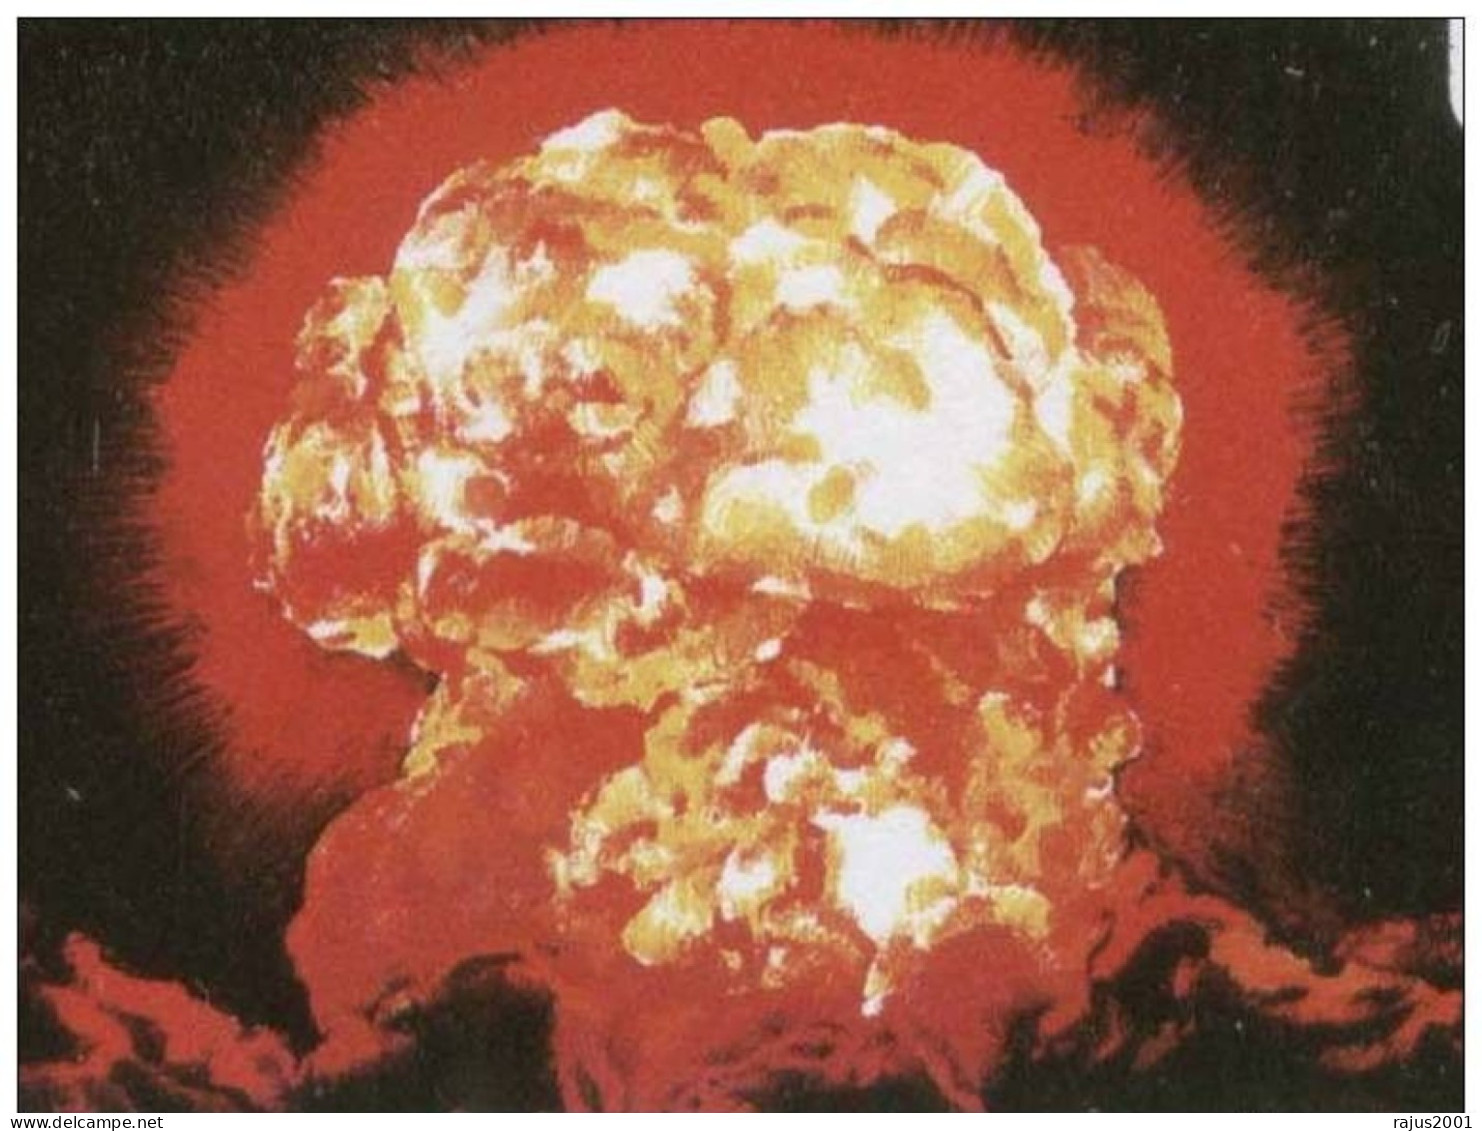 USA & Russia Engage In Arms Race, US Explode First Hydrogen Bomb At Enewetak Atoll, Atomic Bomb, Marshall Island FDC - Atoom